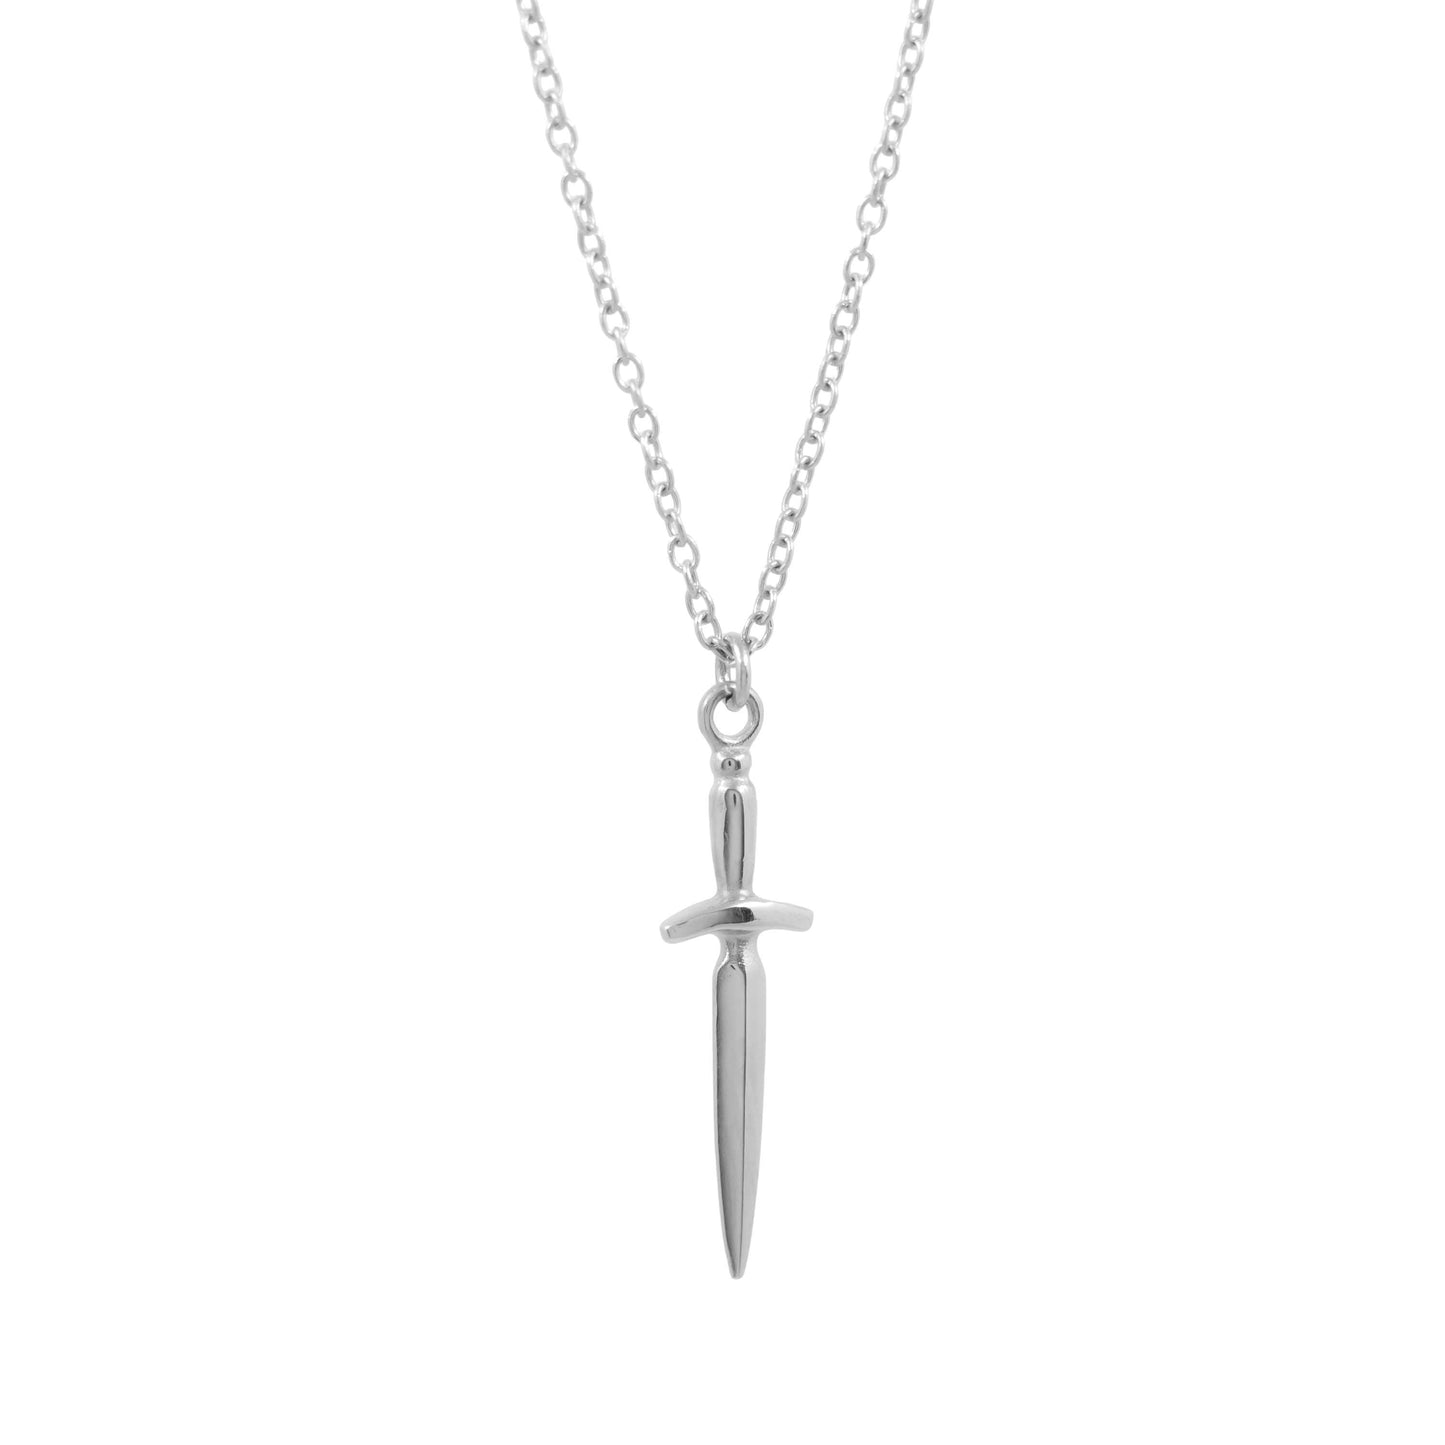 Small Dagger Necklace in Sterling Silver - Futaba Hayashi